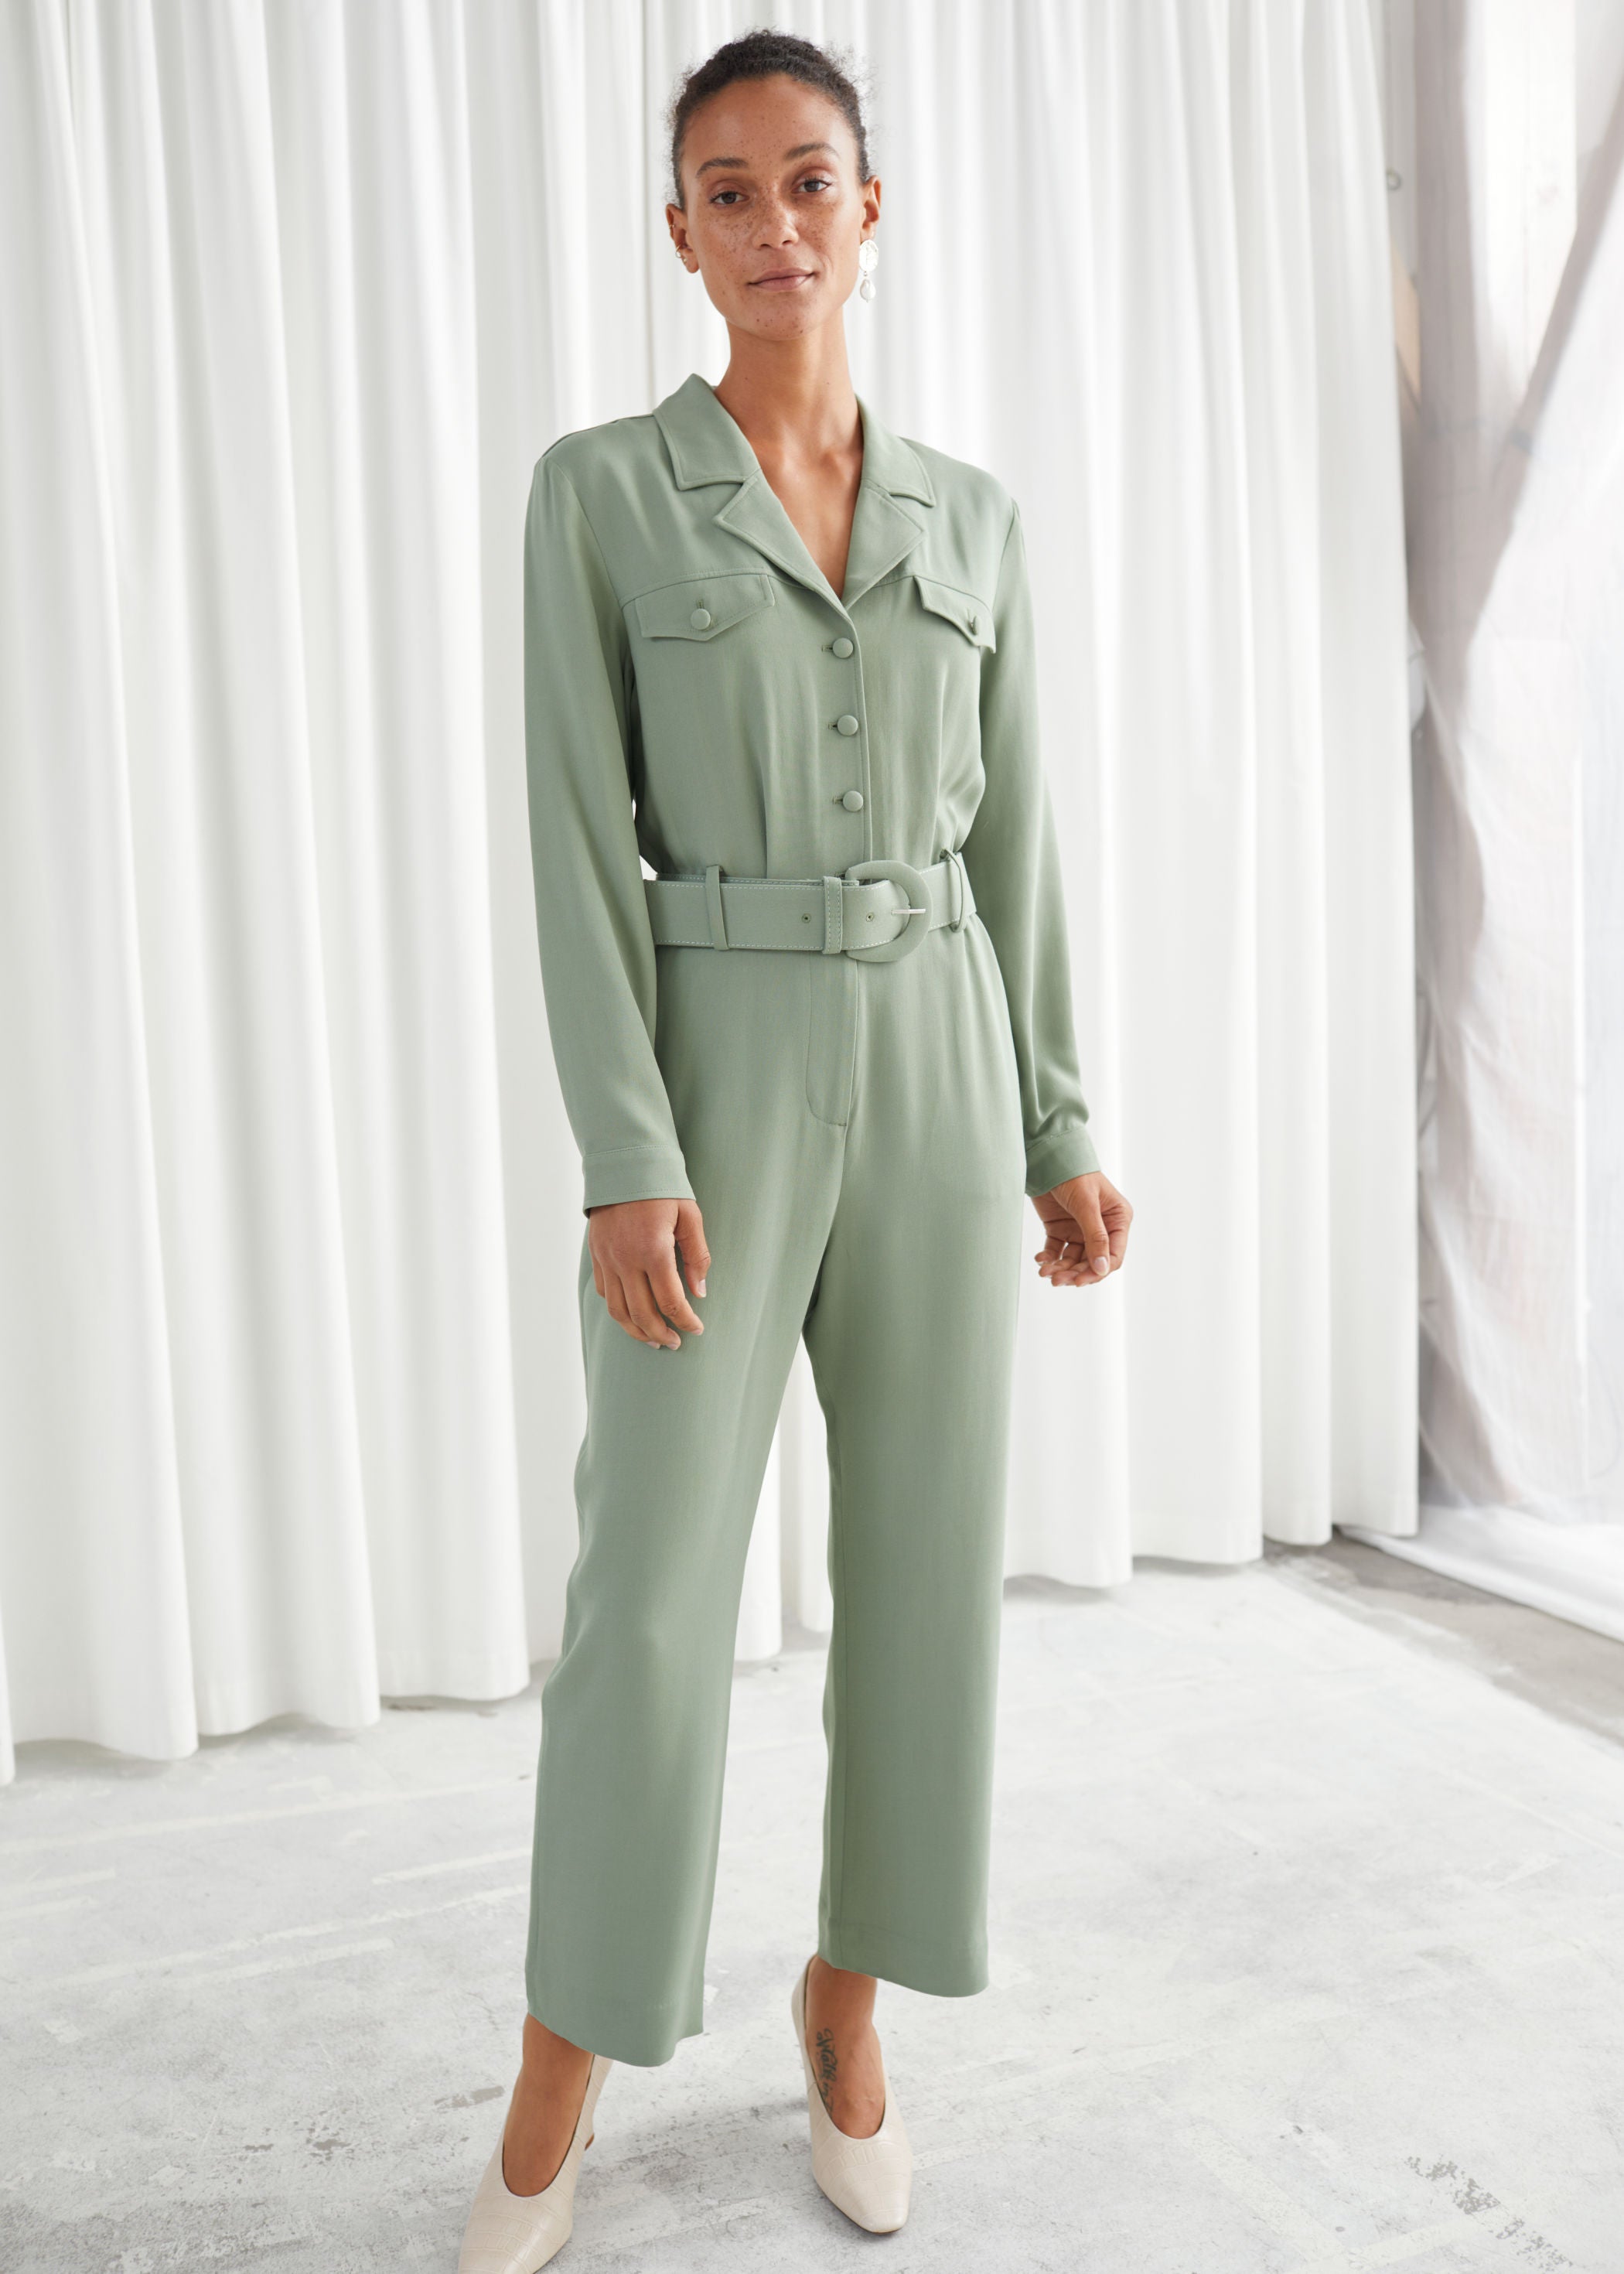 & Other Stories + Belted Long Sleeve Jumpsuit